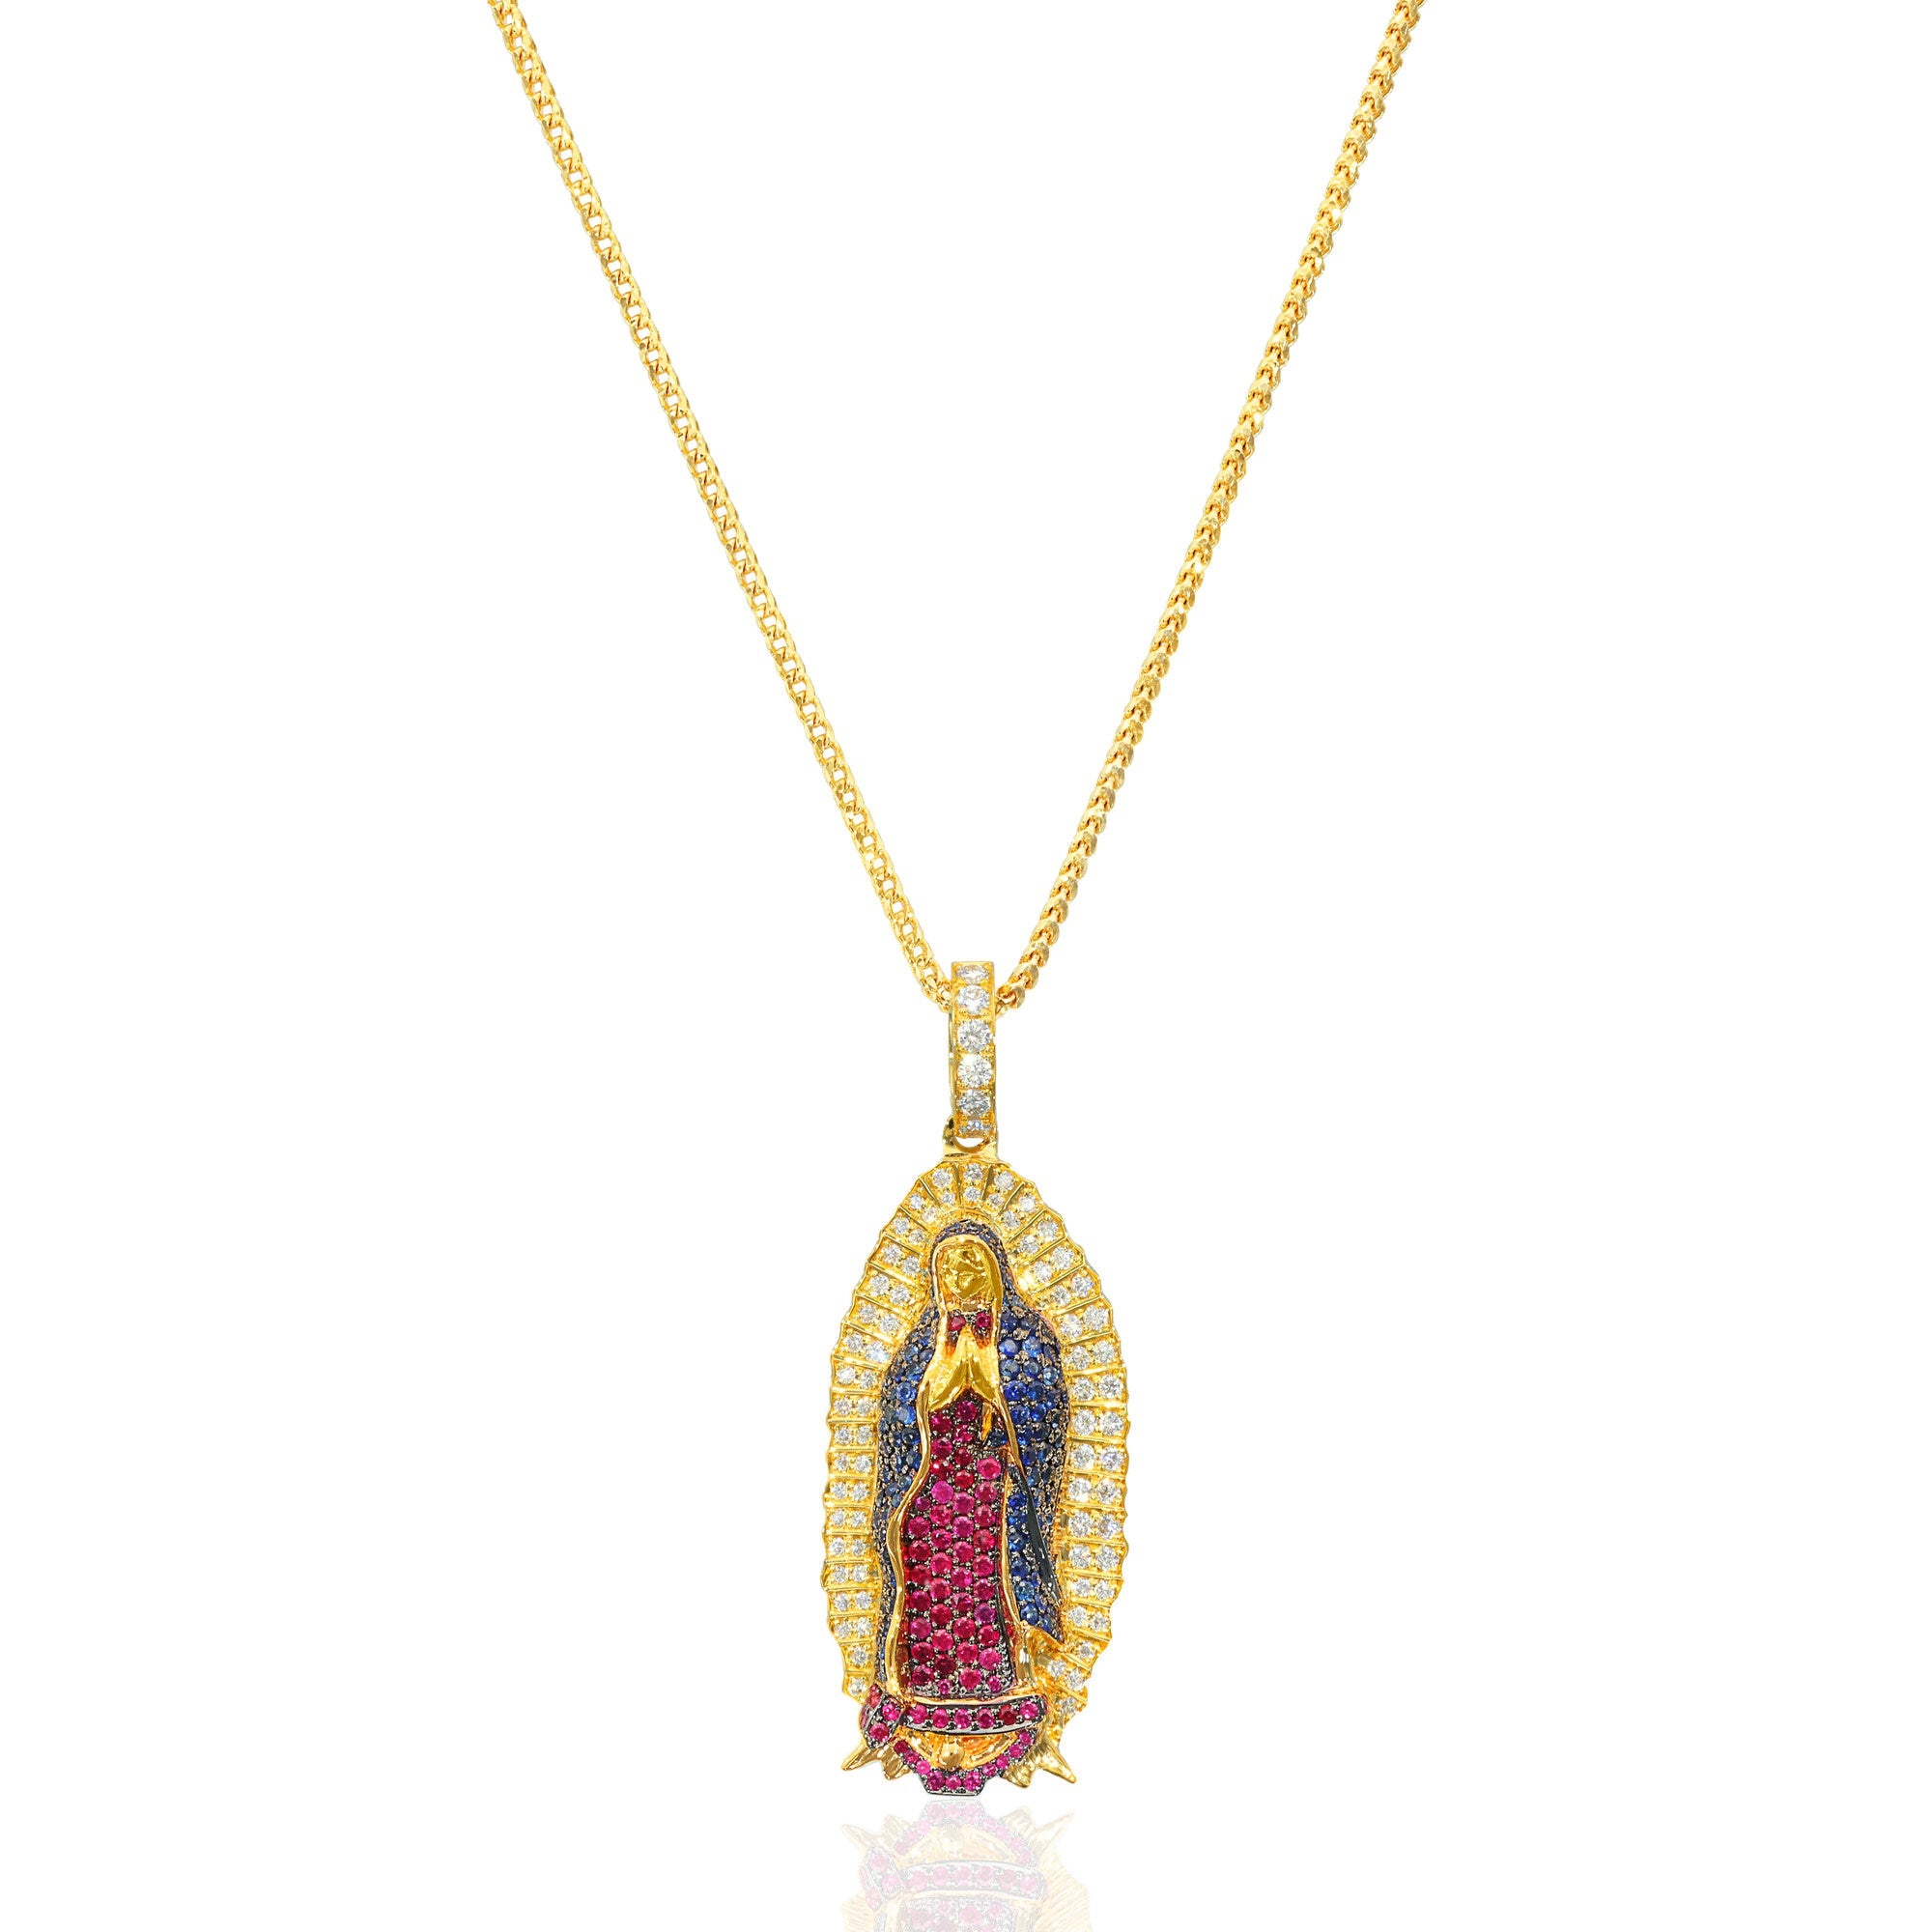 Micro Lady of Guadalupe Piece (Fully Iced, Mosaic) (14K YELLOW GOLD) - IF & Co. Custom Jewelers